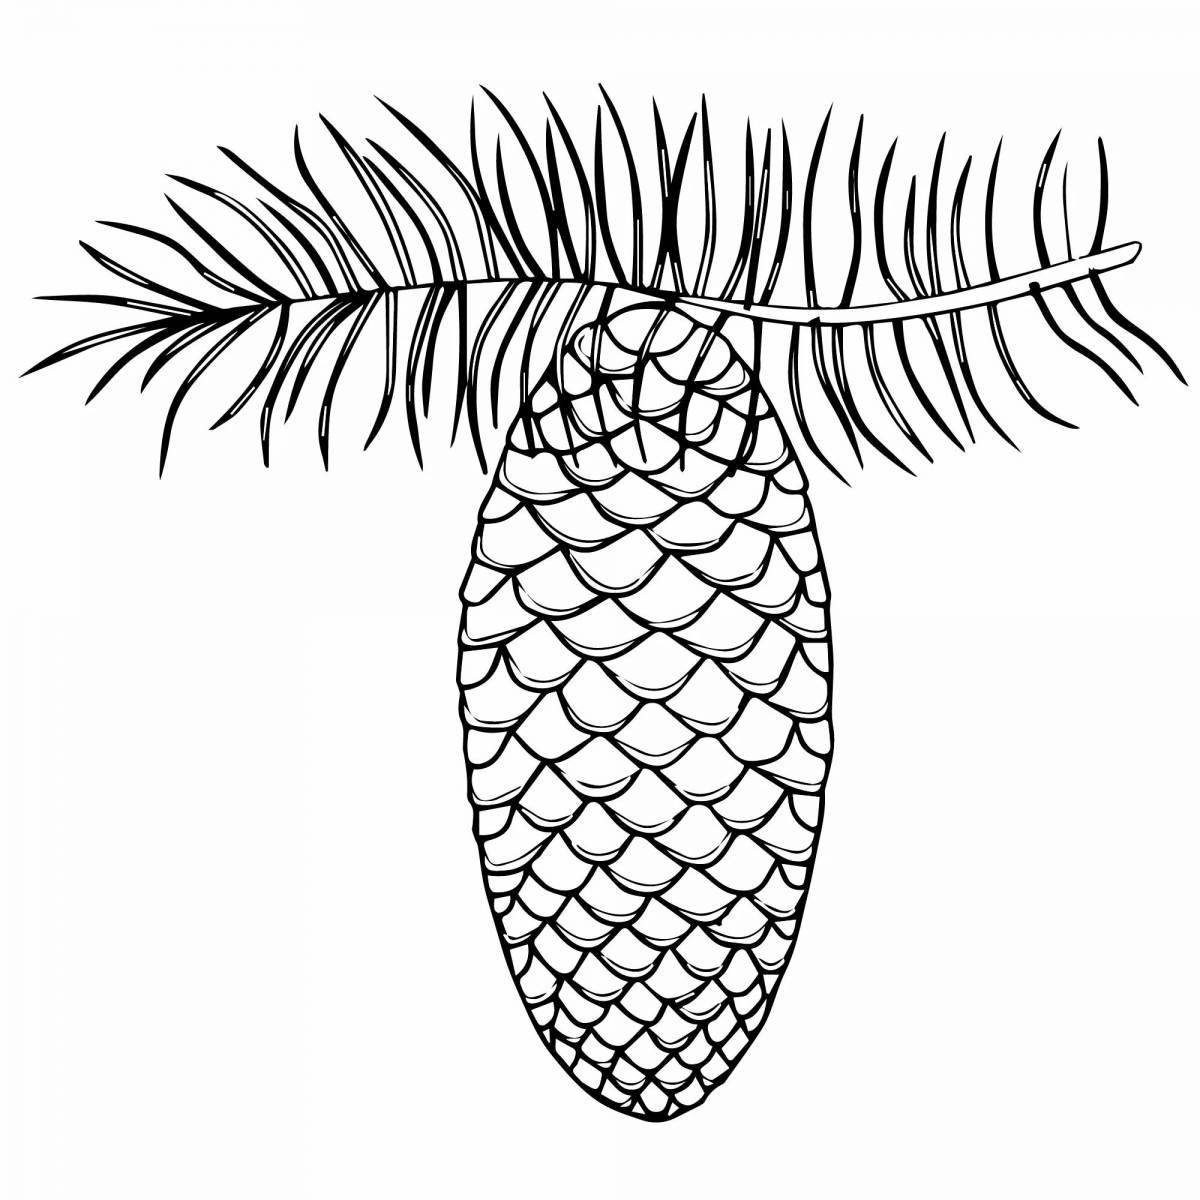 Amazing fir branch coloring page for kids